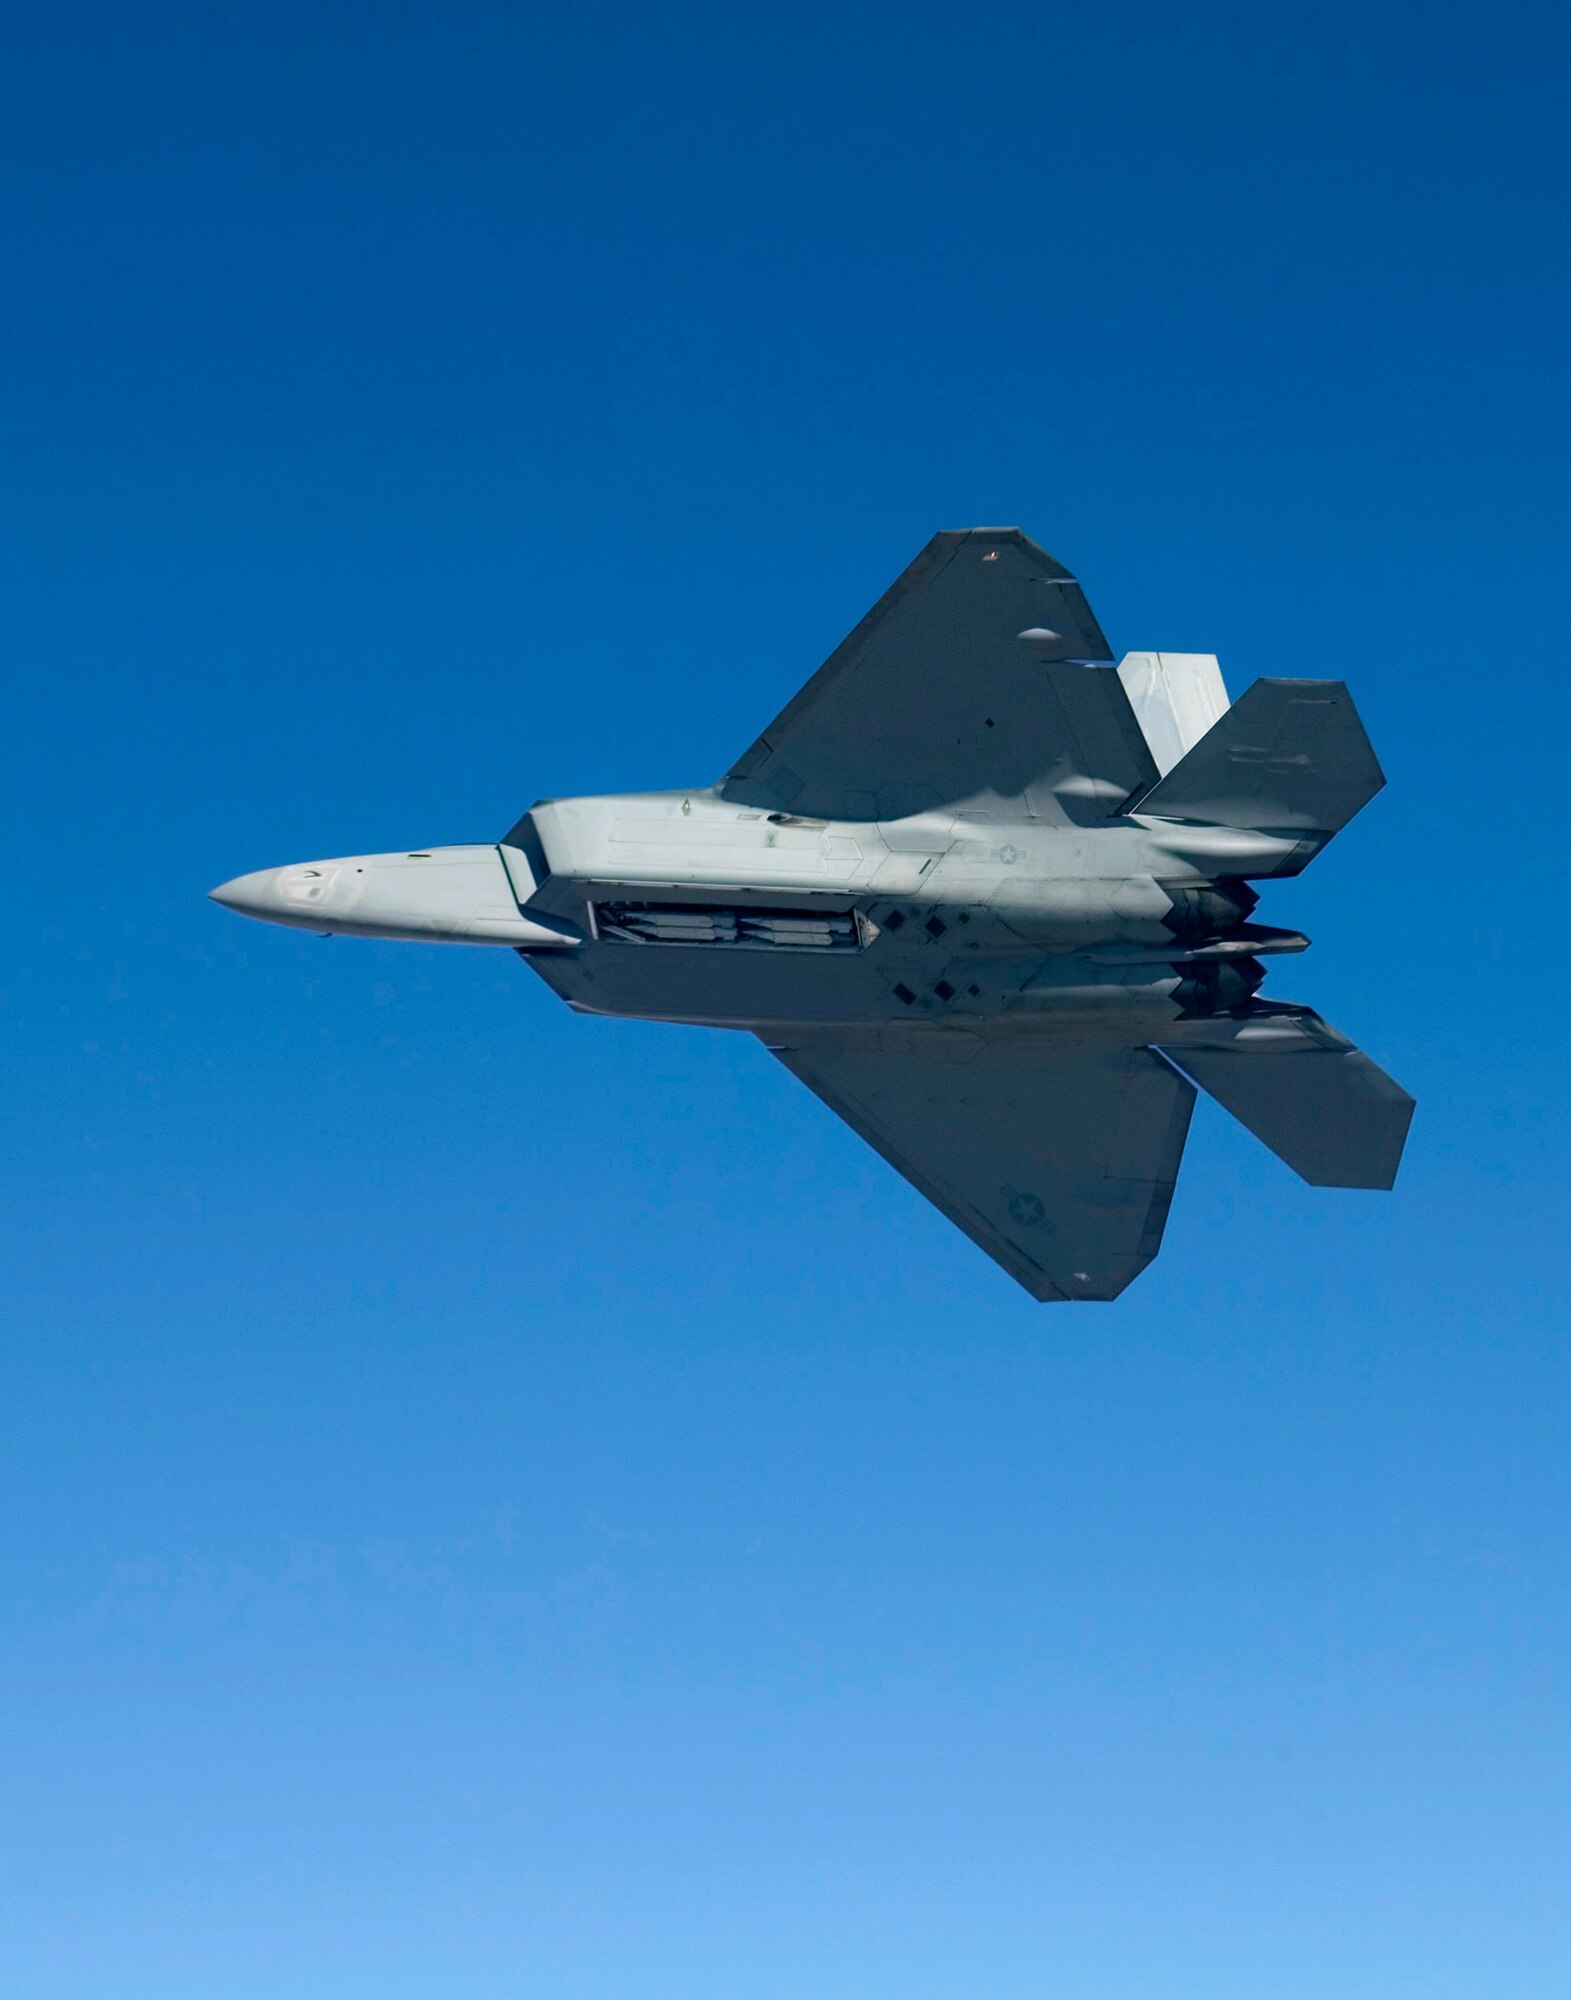 An F-22A Raptor flies Feb. 2, 2007, with four Small Diameter Bombs on board. Pilots and engineers from the F-22 Combined Test Force were performing load tests to ensure the GBU-39/B Small Diameter Bomb system does not exceed structural load boundaries for the Raptor. (Photo by Darin Russell)